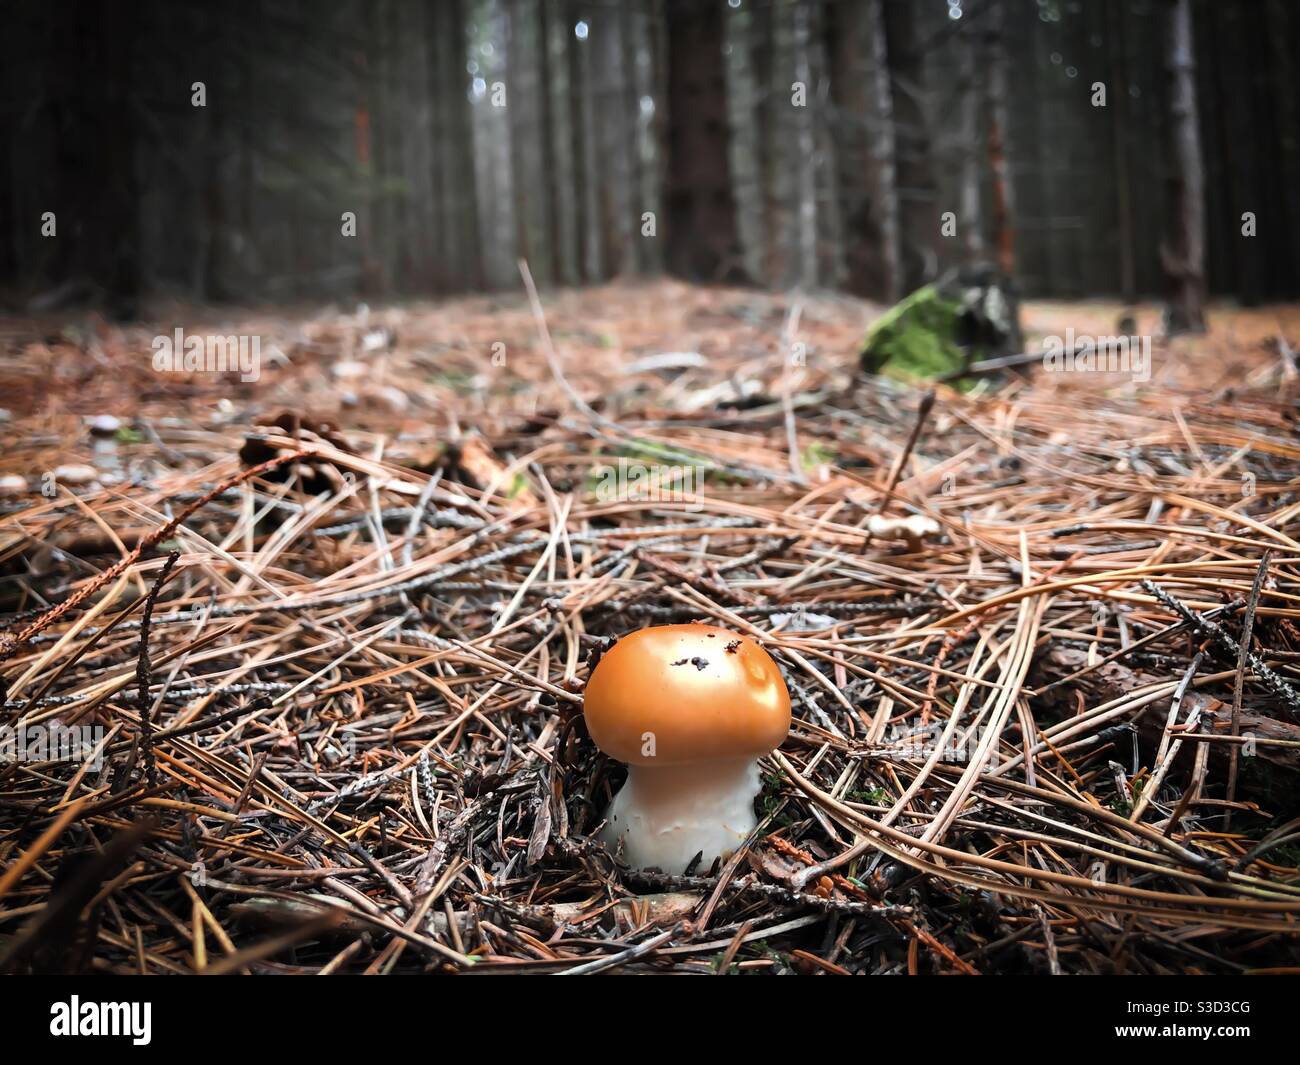 Tiny mushroom in the forest Stock Photo